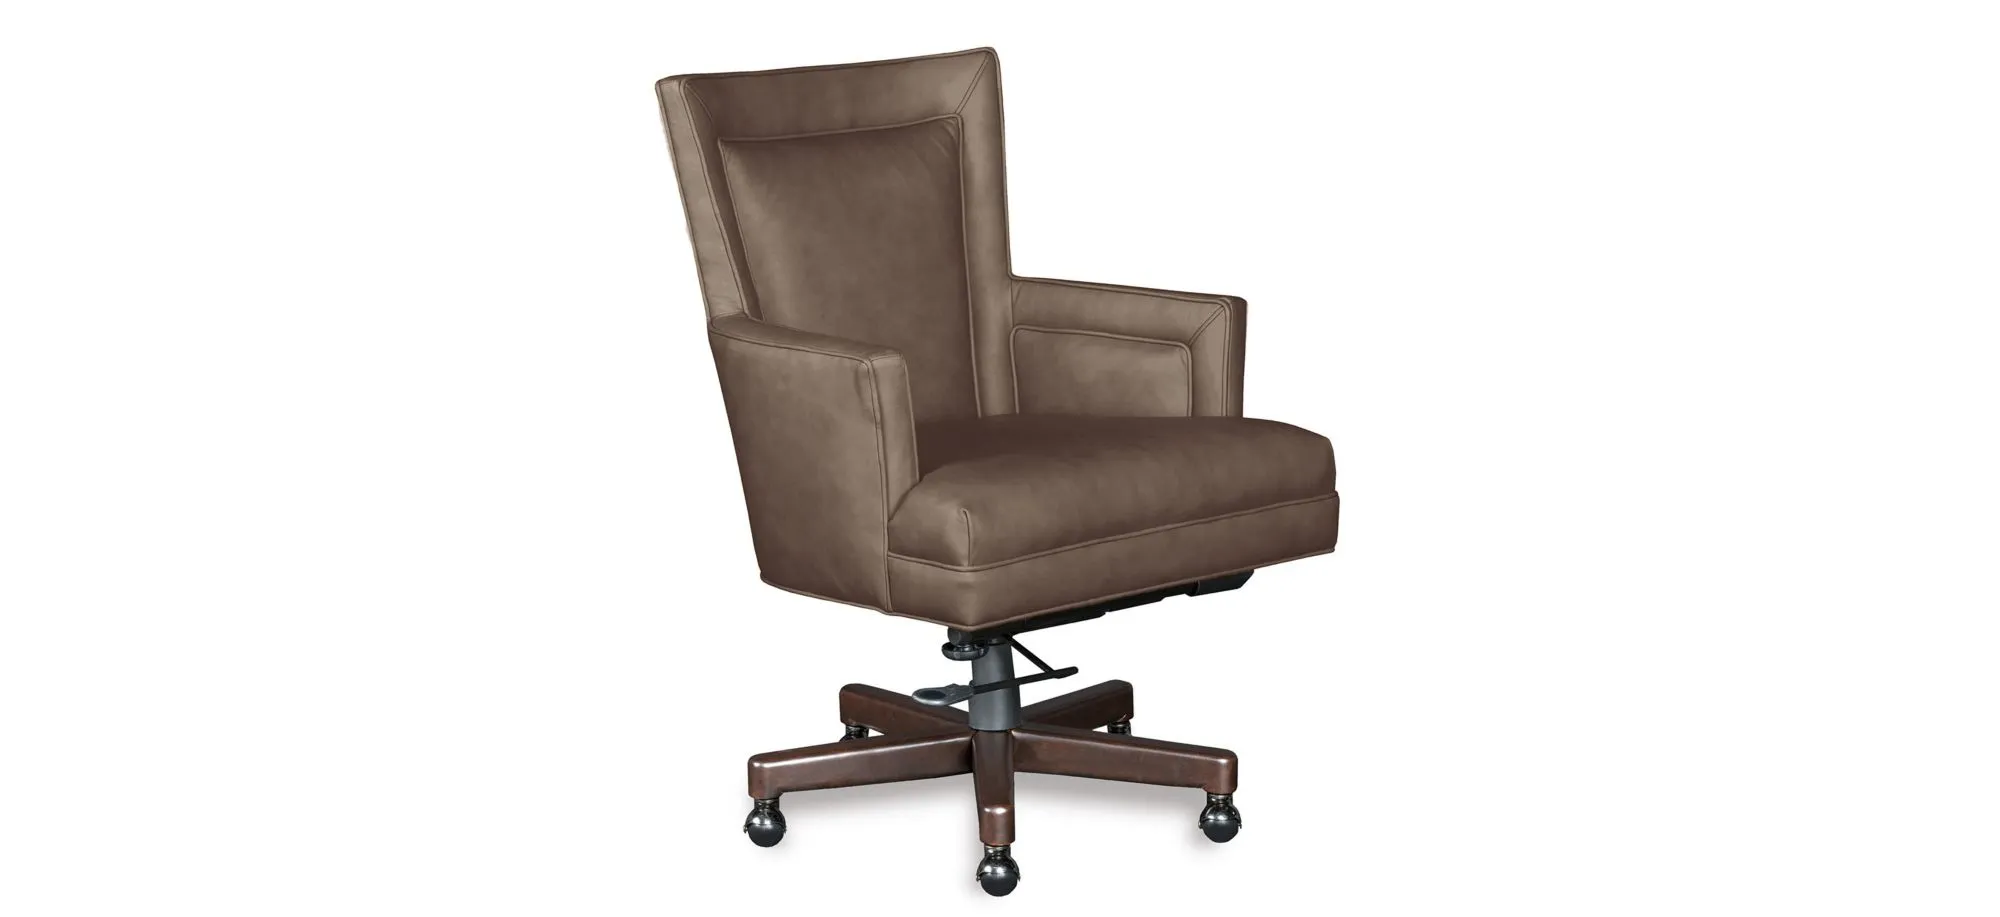 Rosa Executive Swivel Tilt Chair in Brown by Hooker Furniture